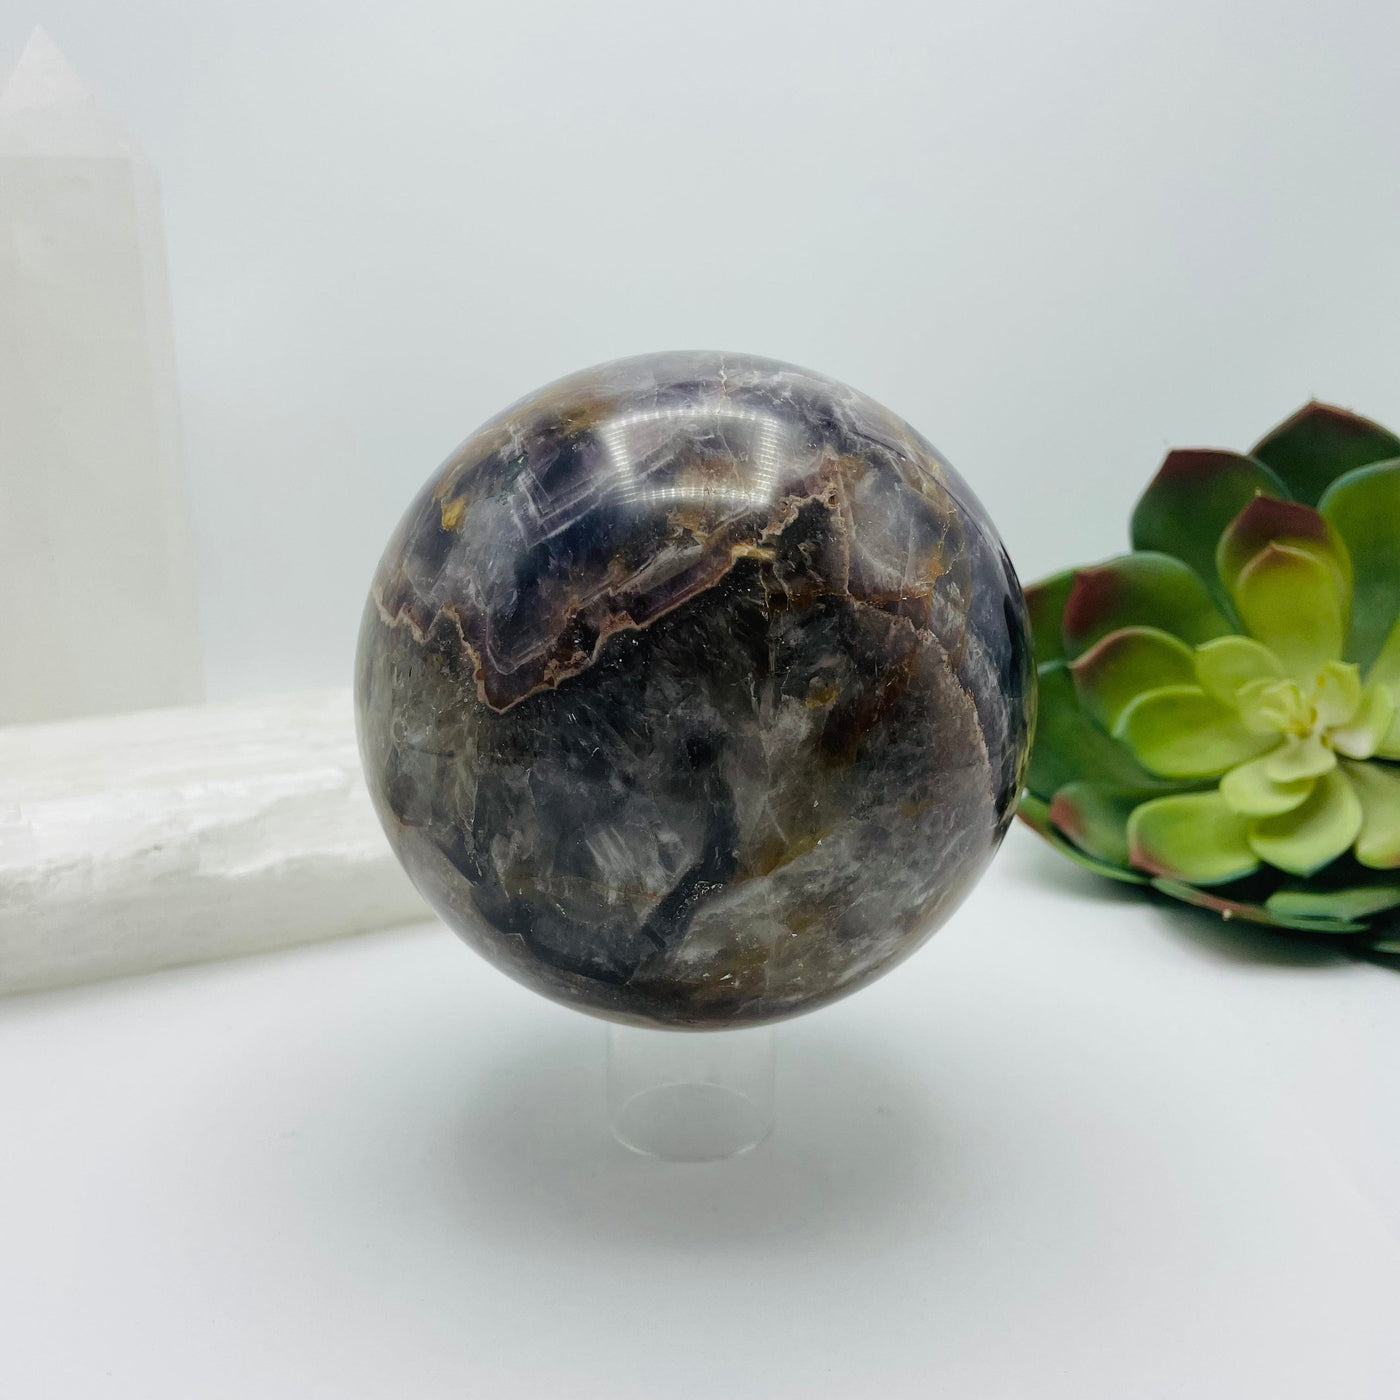 Chevron amethyst sphere with decorations in the background